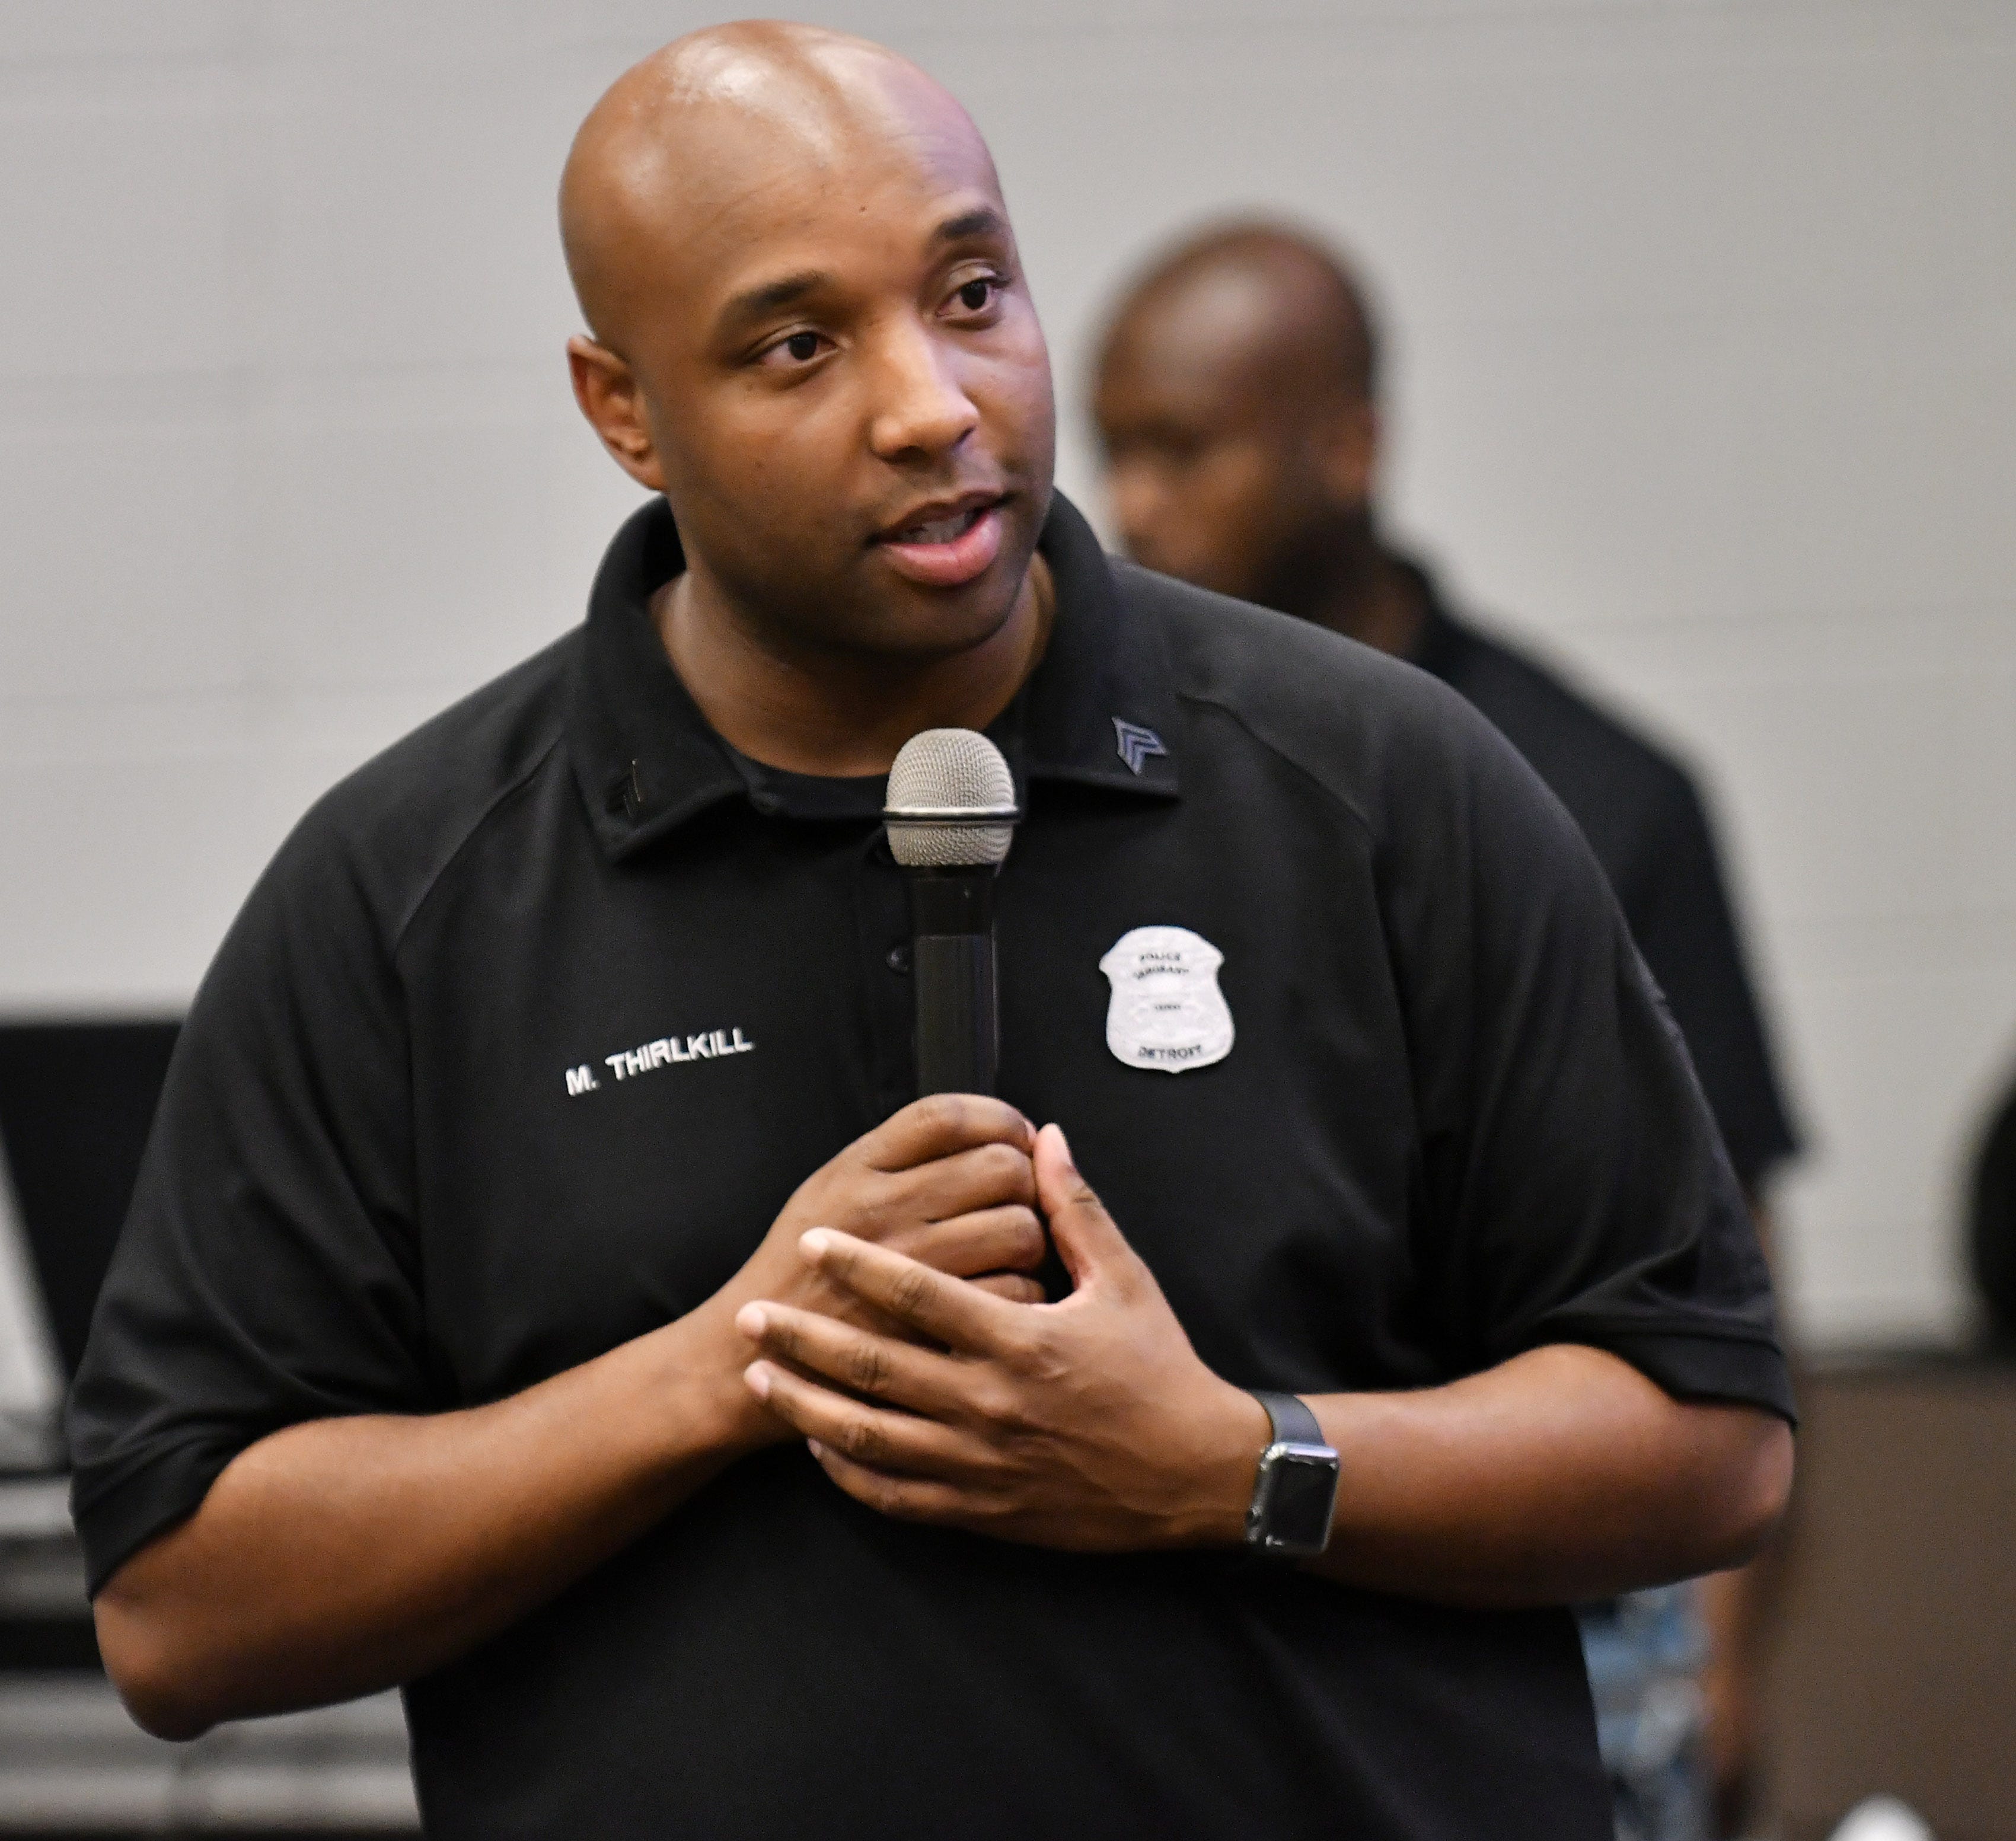 Detroit police Sgt. Marcus Thirlkill welcomes the young men during a Cuts and Coding educational event for young black males at the Ford Research and Engagement Center on Maddelein Street in Detroit on Aug. 9, 2018. This is one week of an ongoing project with Detroit police Sgt. Marcus Thirlkill and some of his co-workers who meet with the young men each week doing various mentorship programs.